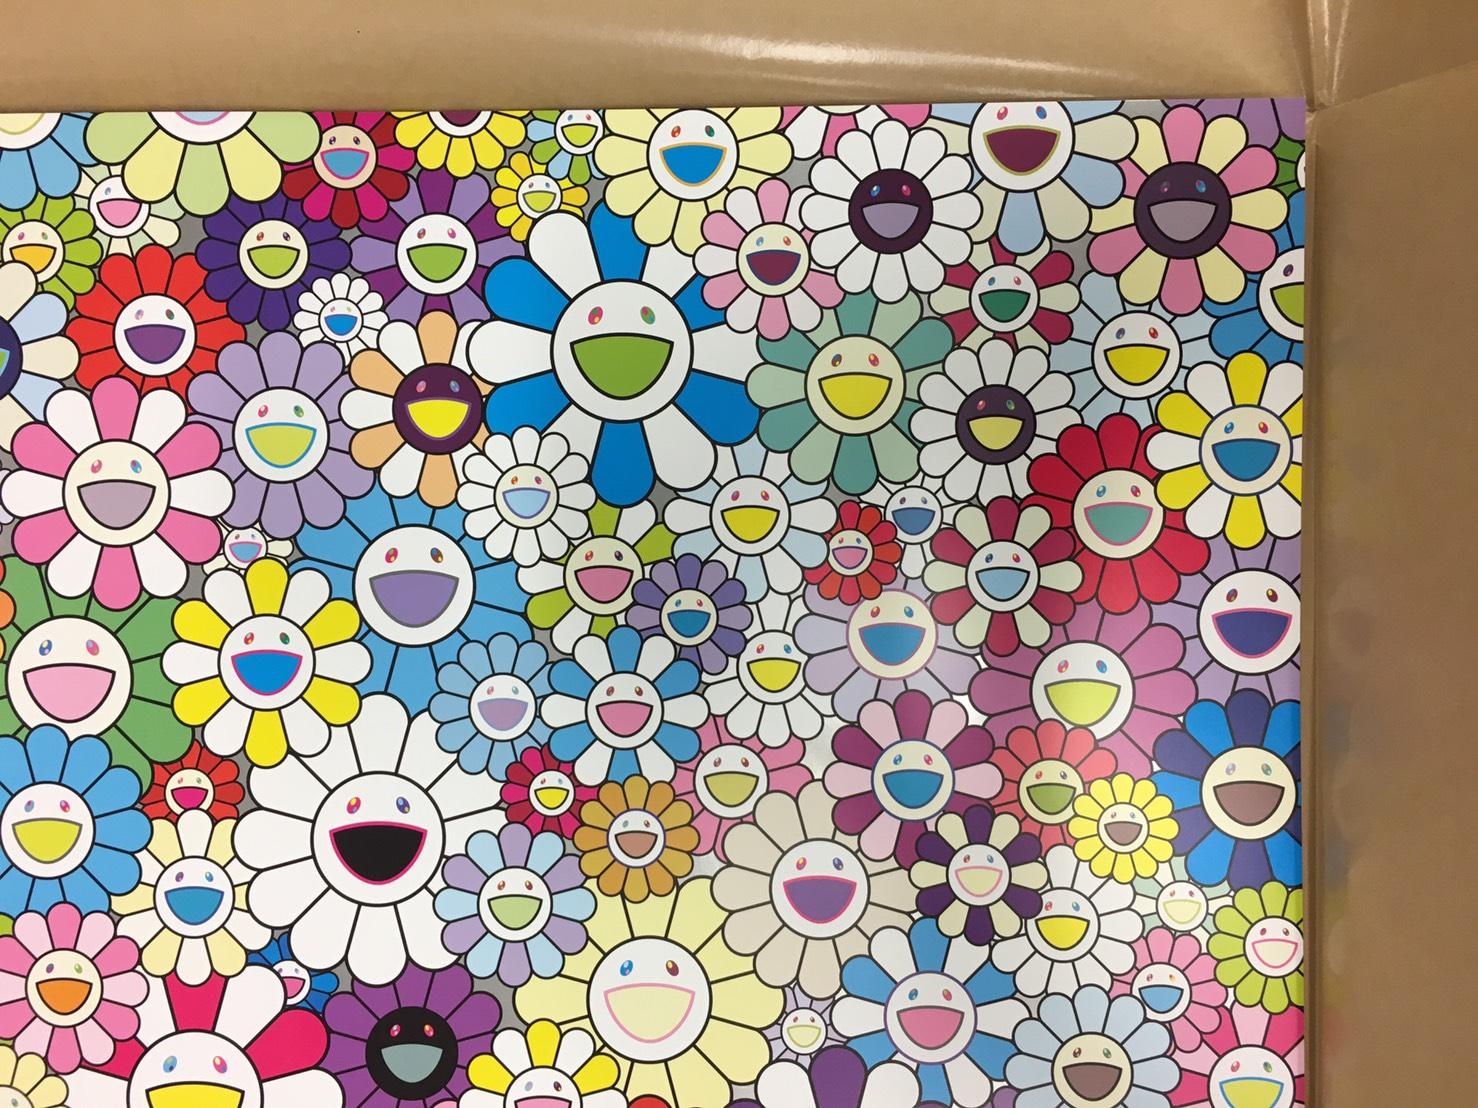 The nether world Limited Edition (print) by Takashi Murakami signed and numbered 1